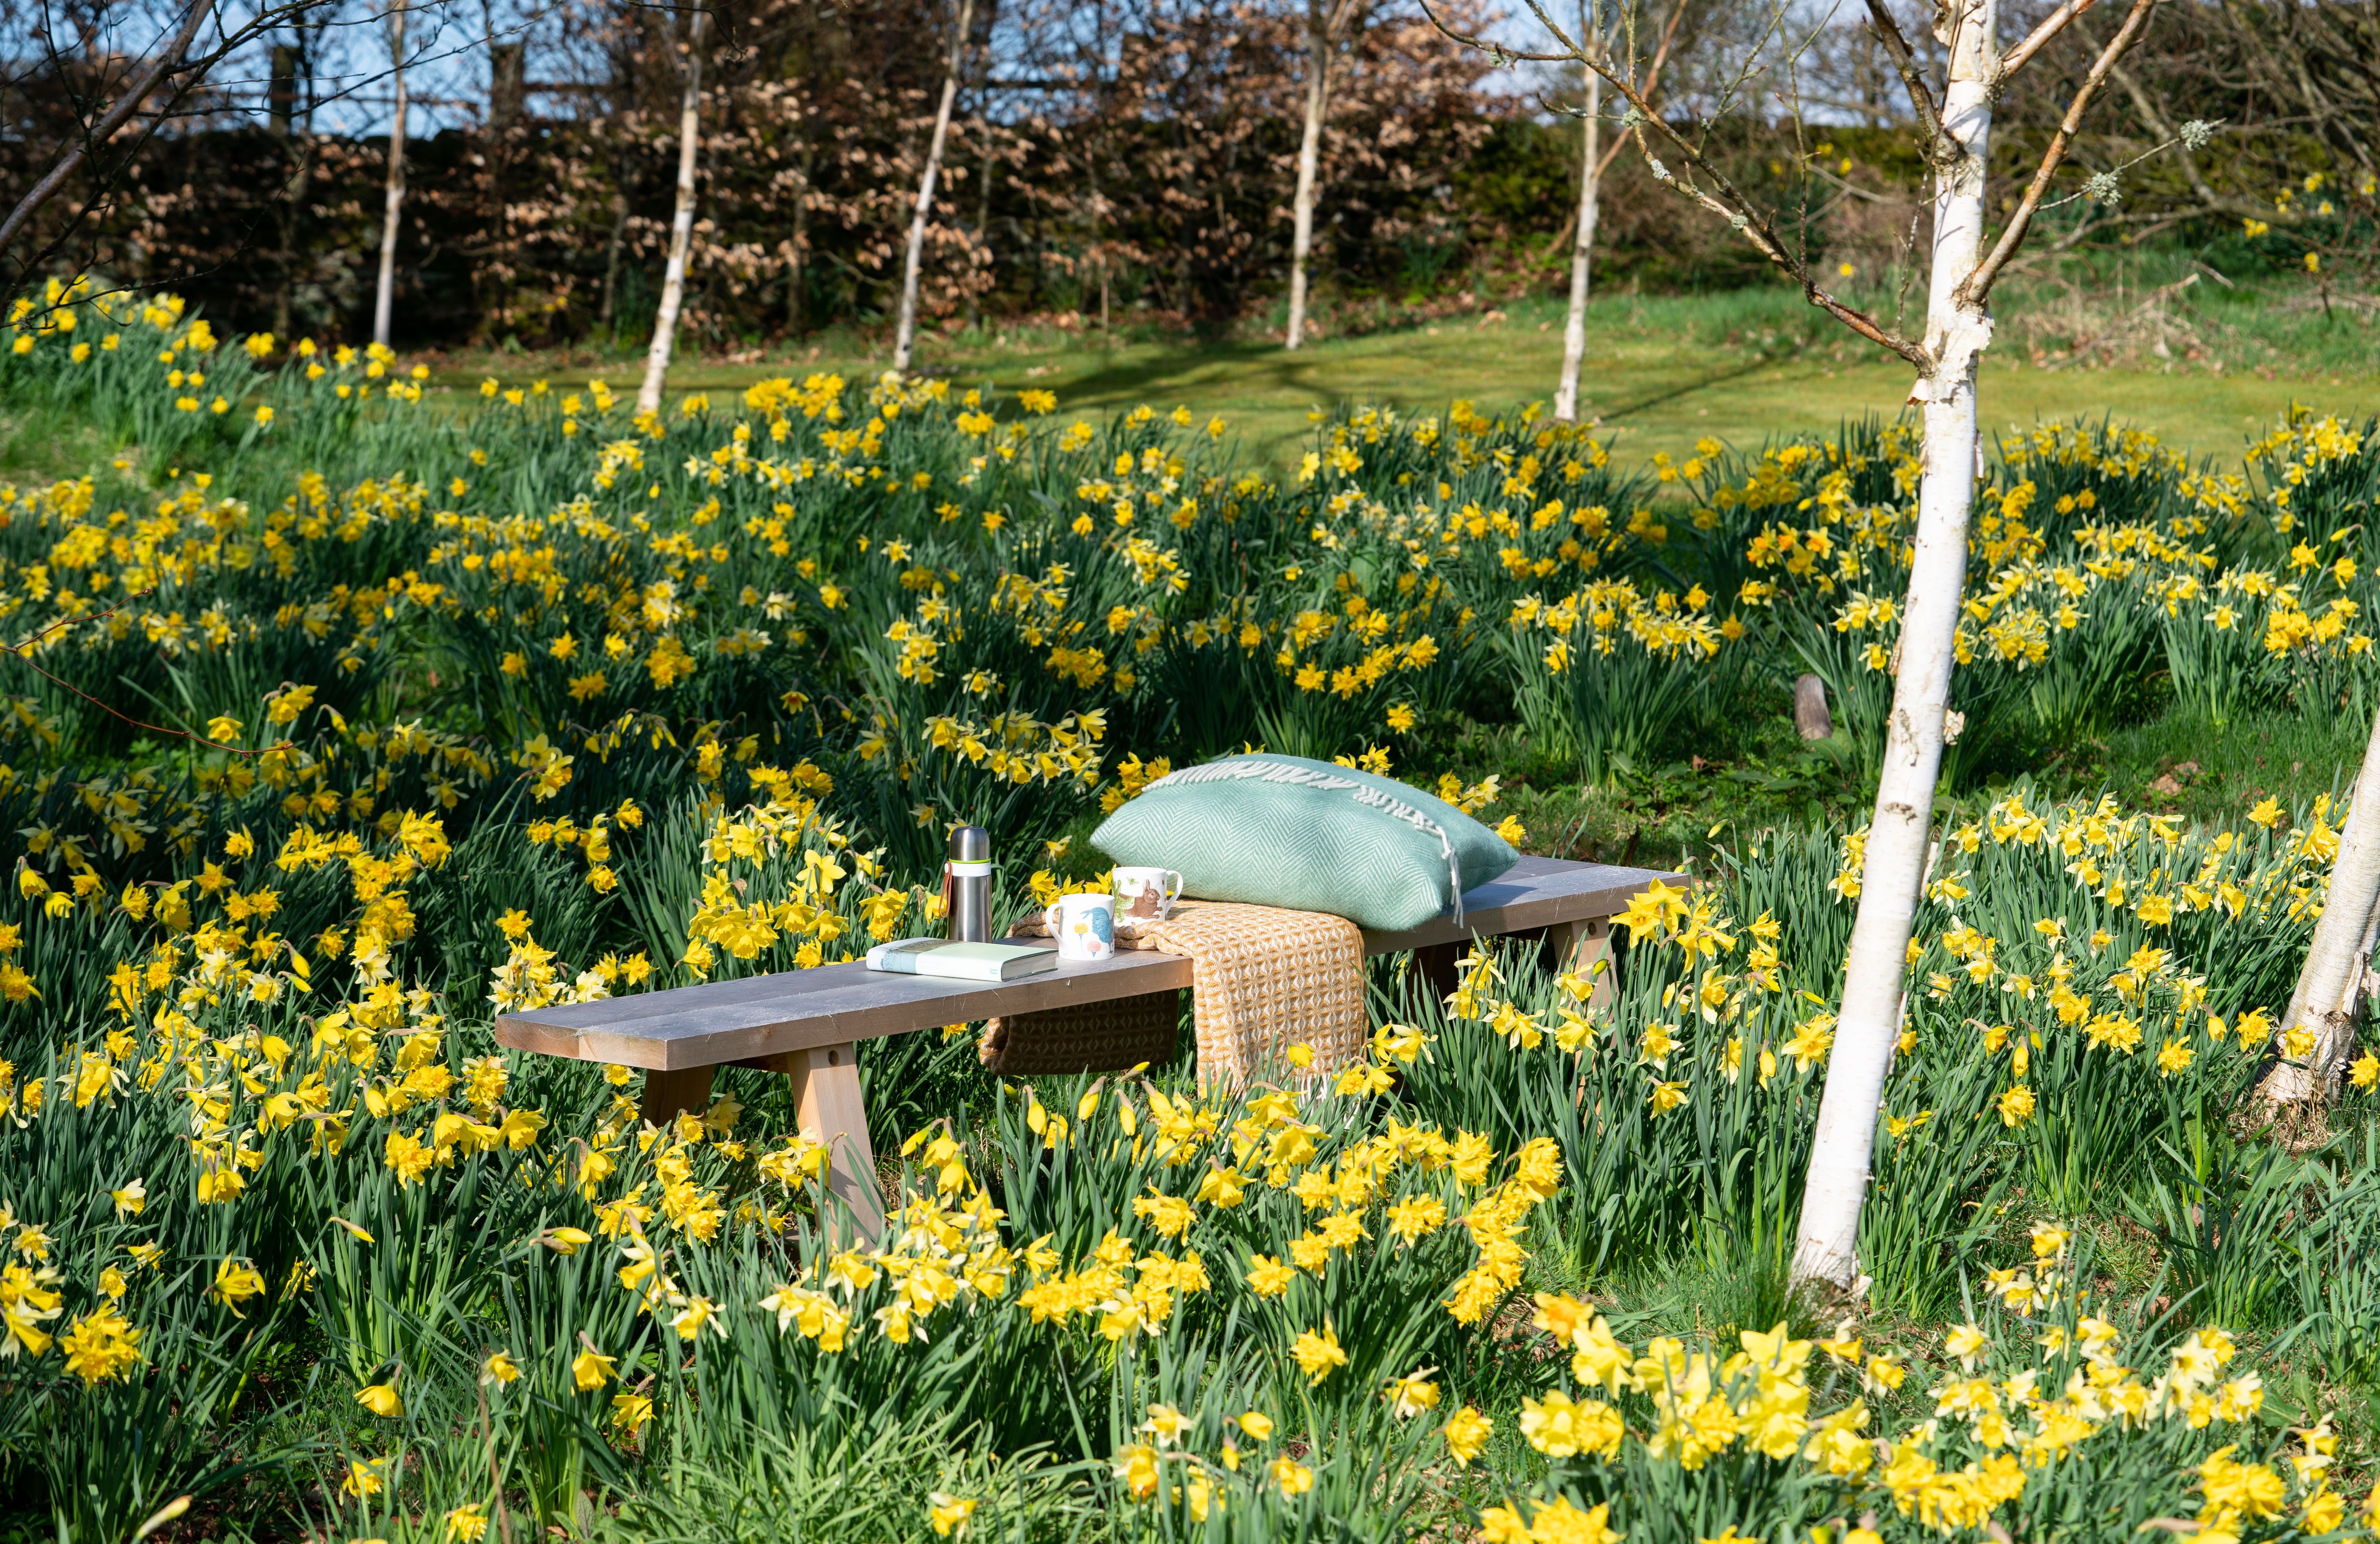 Scottish blankets on a bench with spring flowers